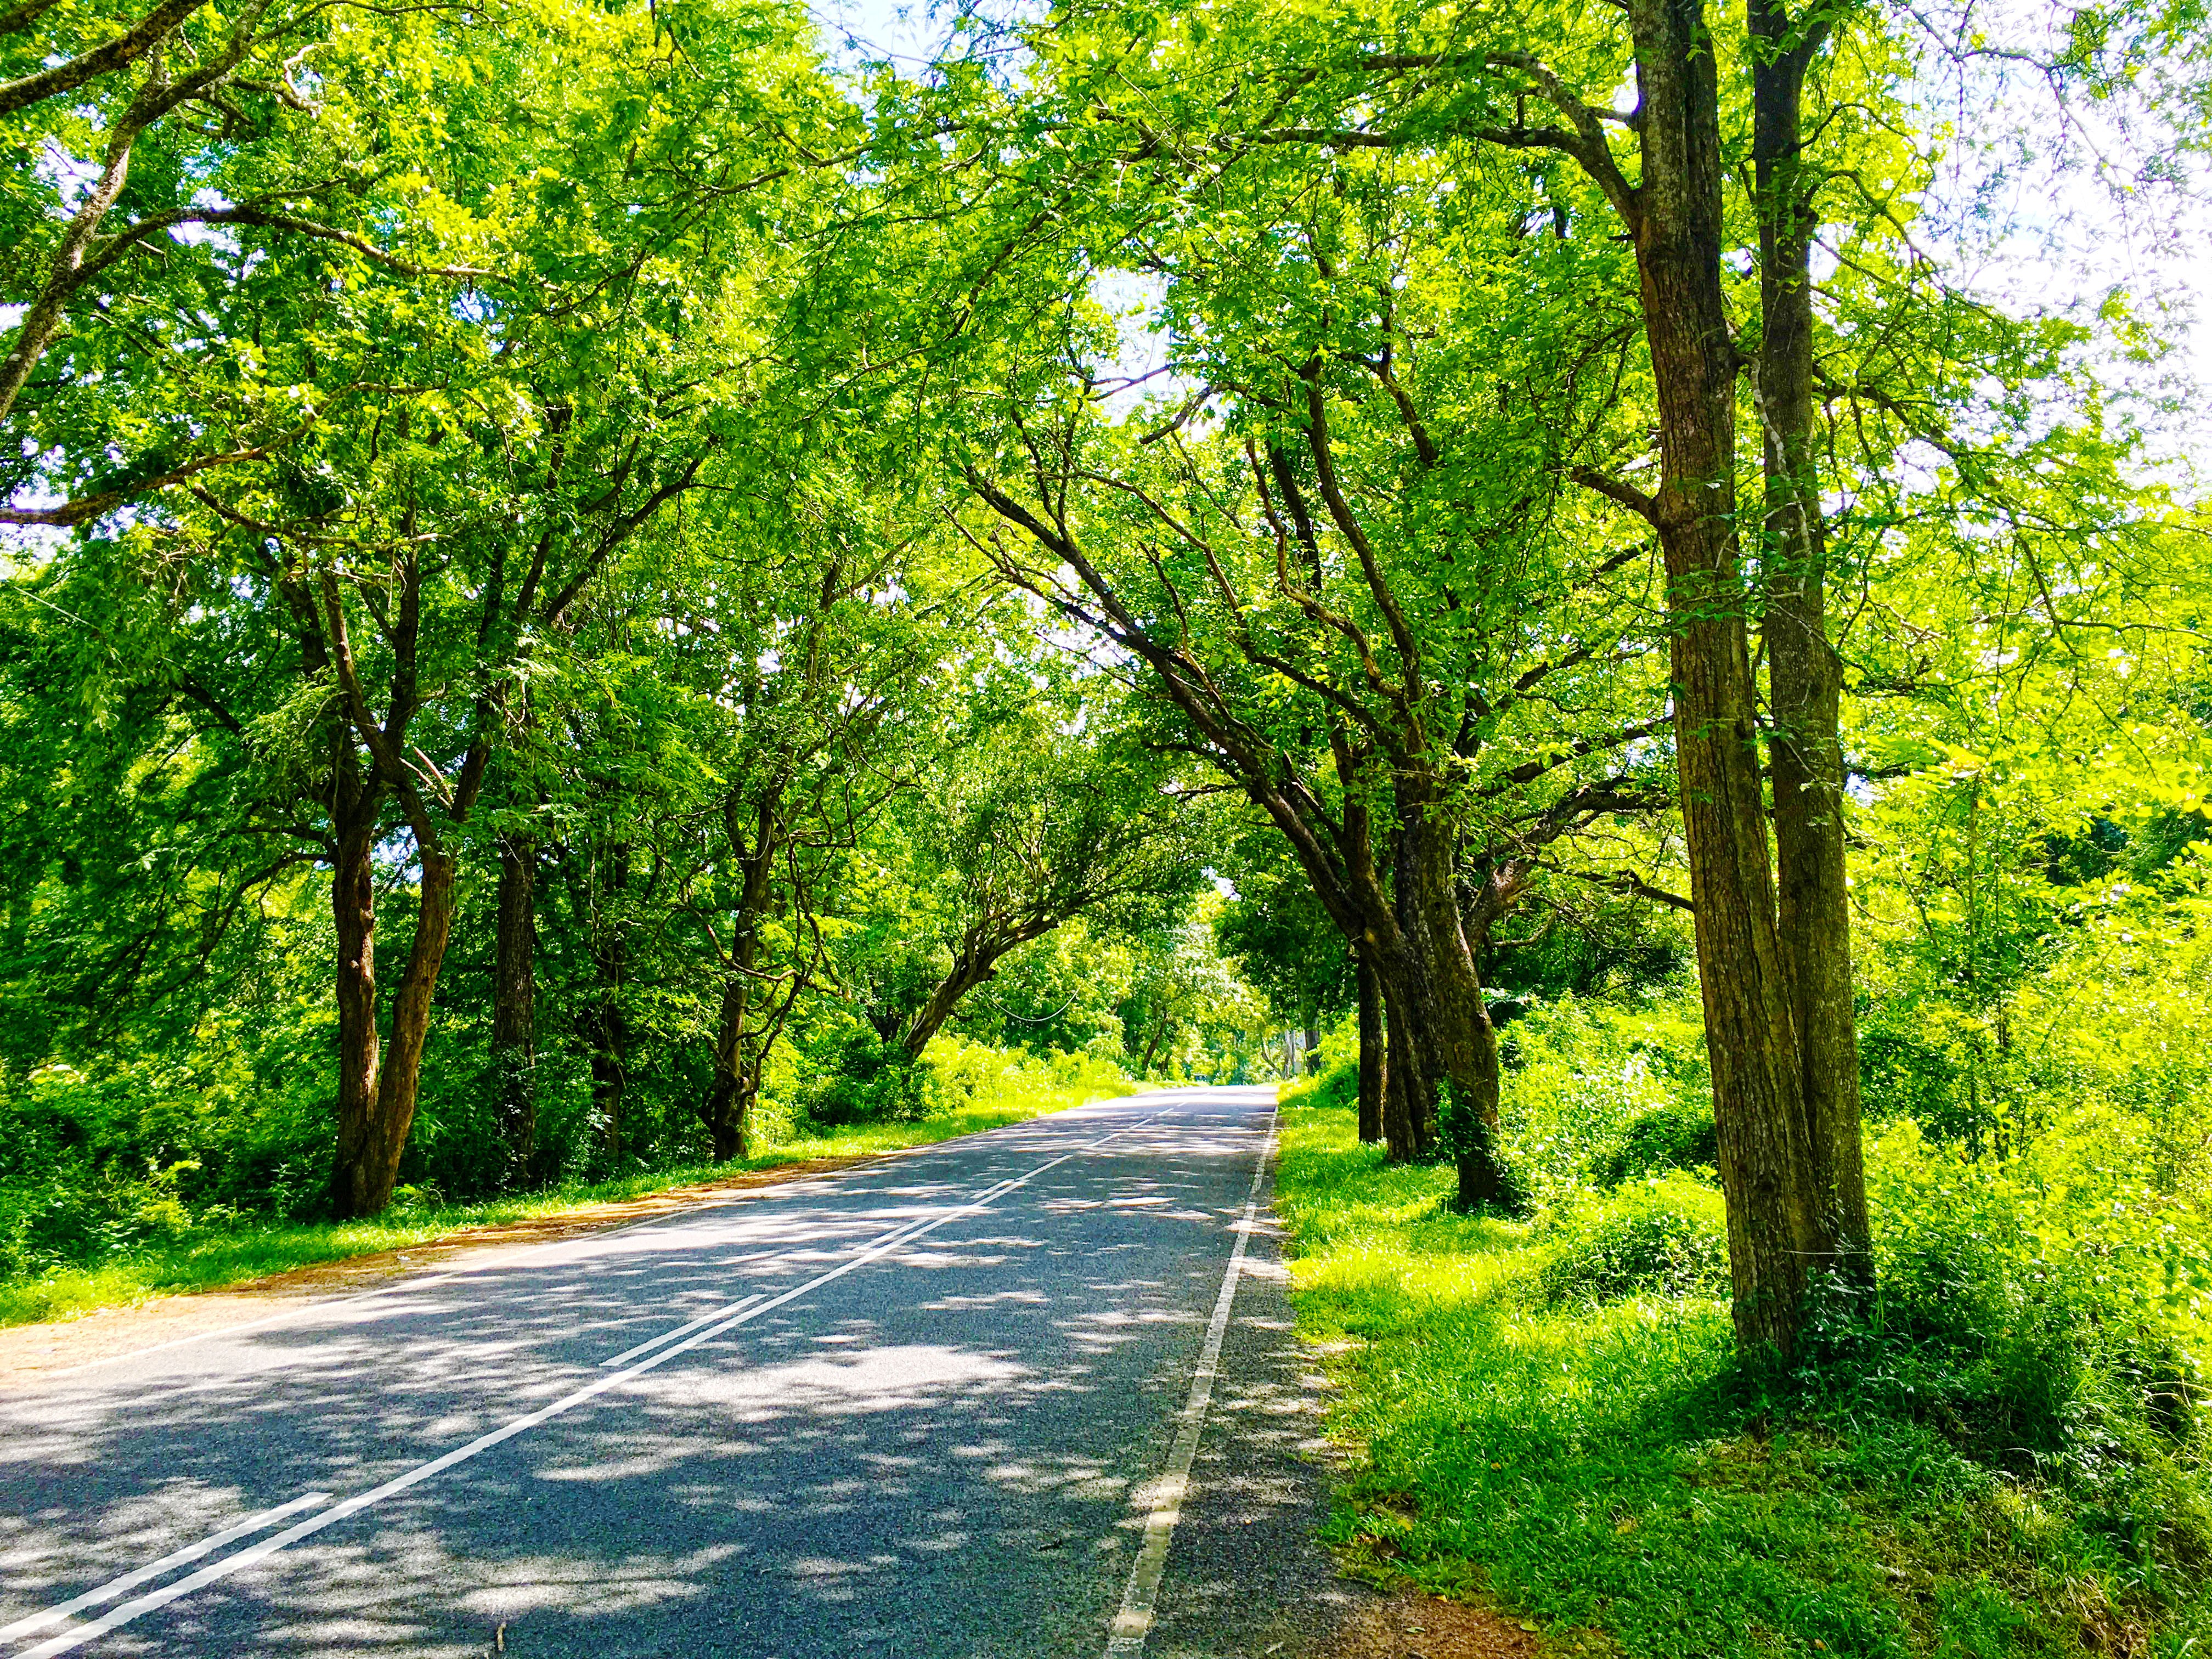 General 4032x3024 road trees photography green asphalt outdoors